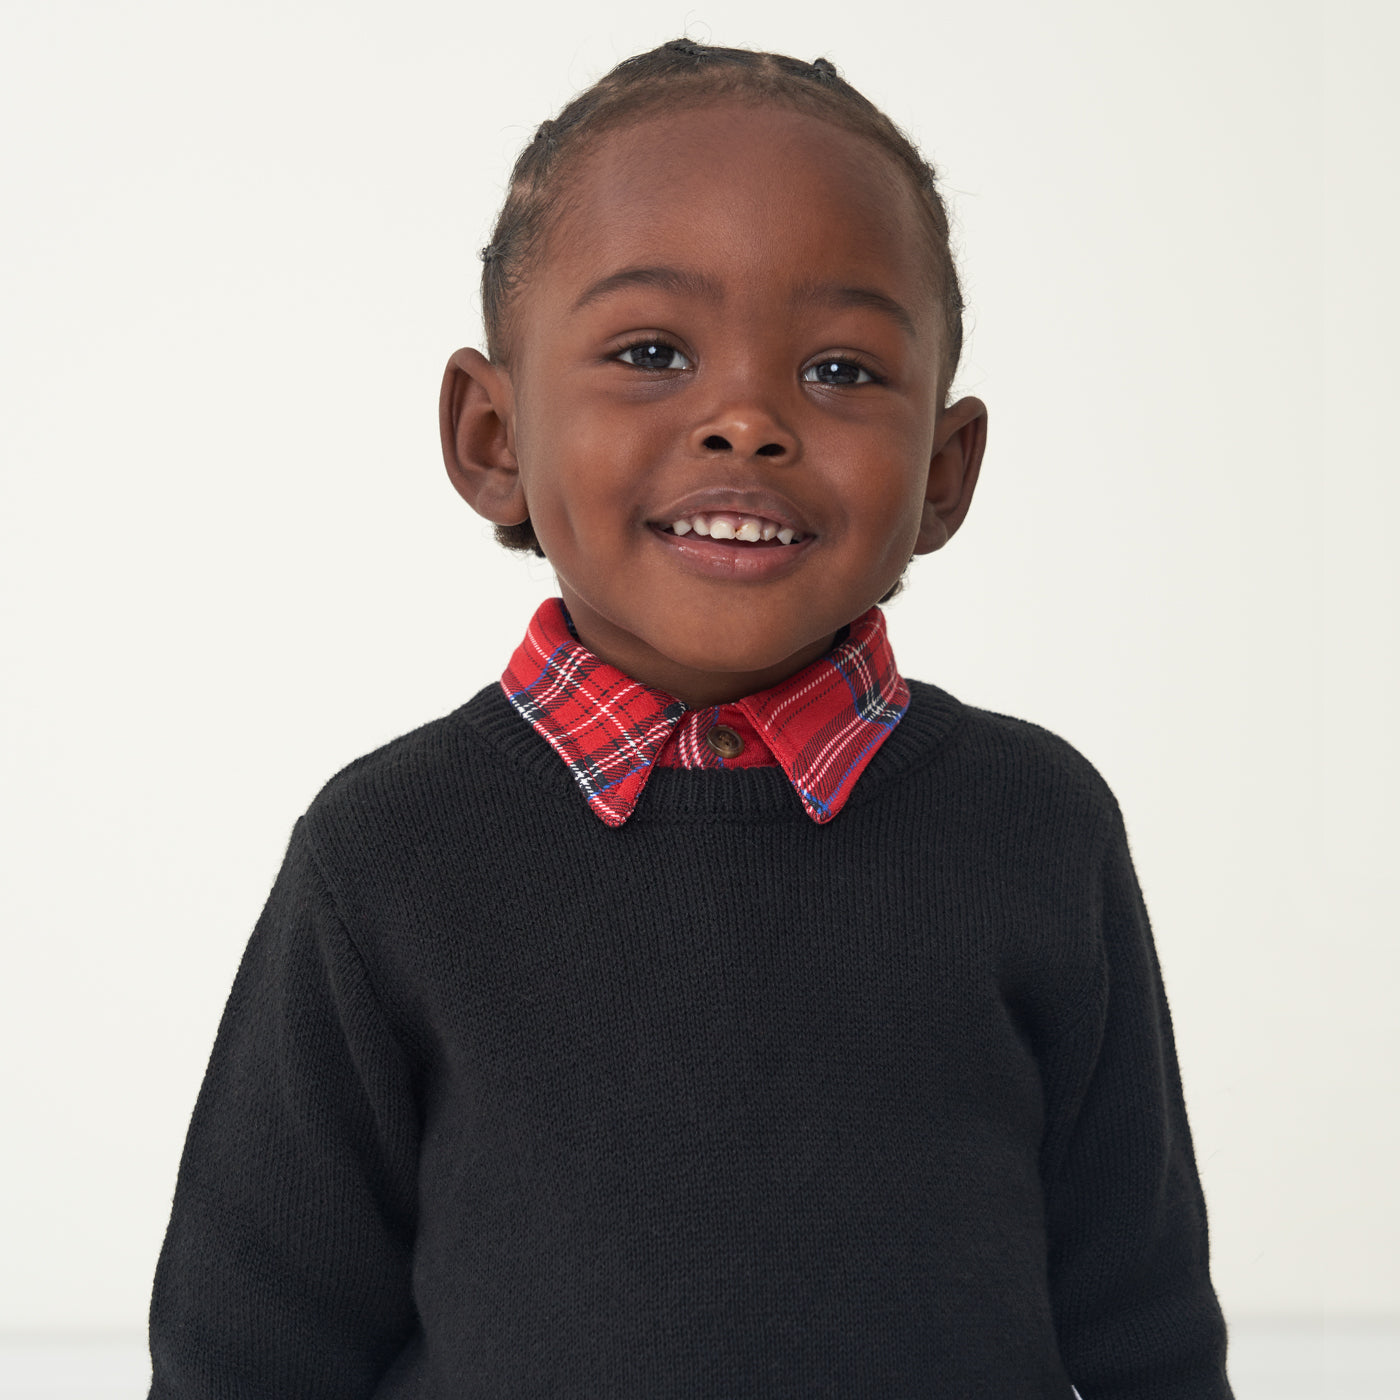 Child wearing a Holiday Plaid polo shirt and coordinating Black knit sweater